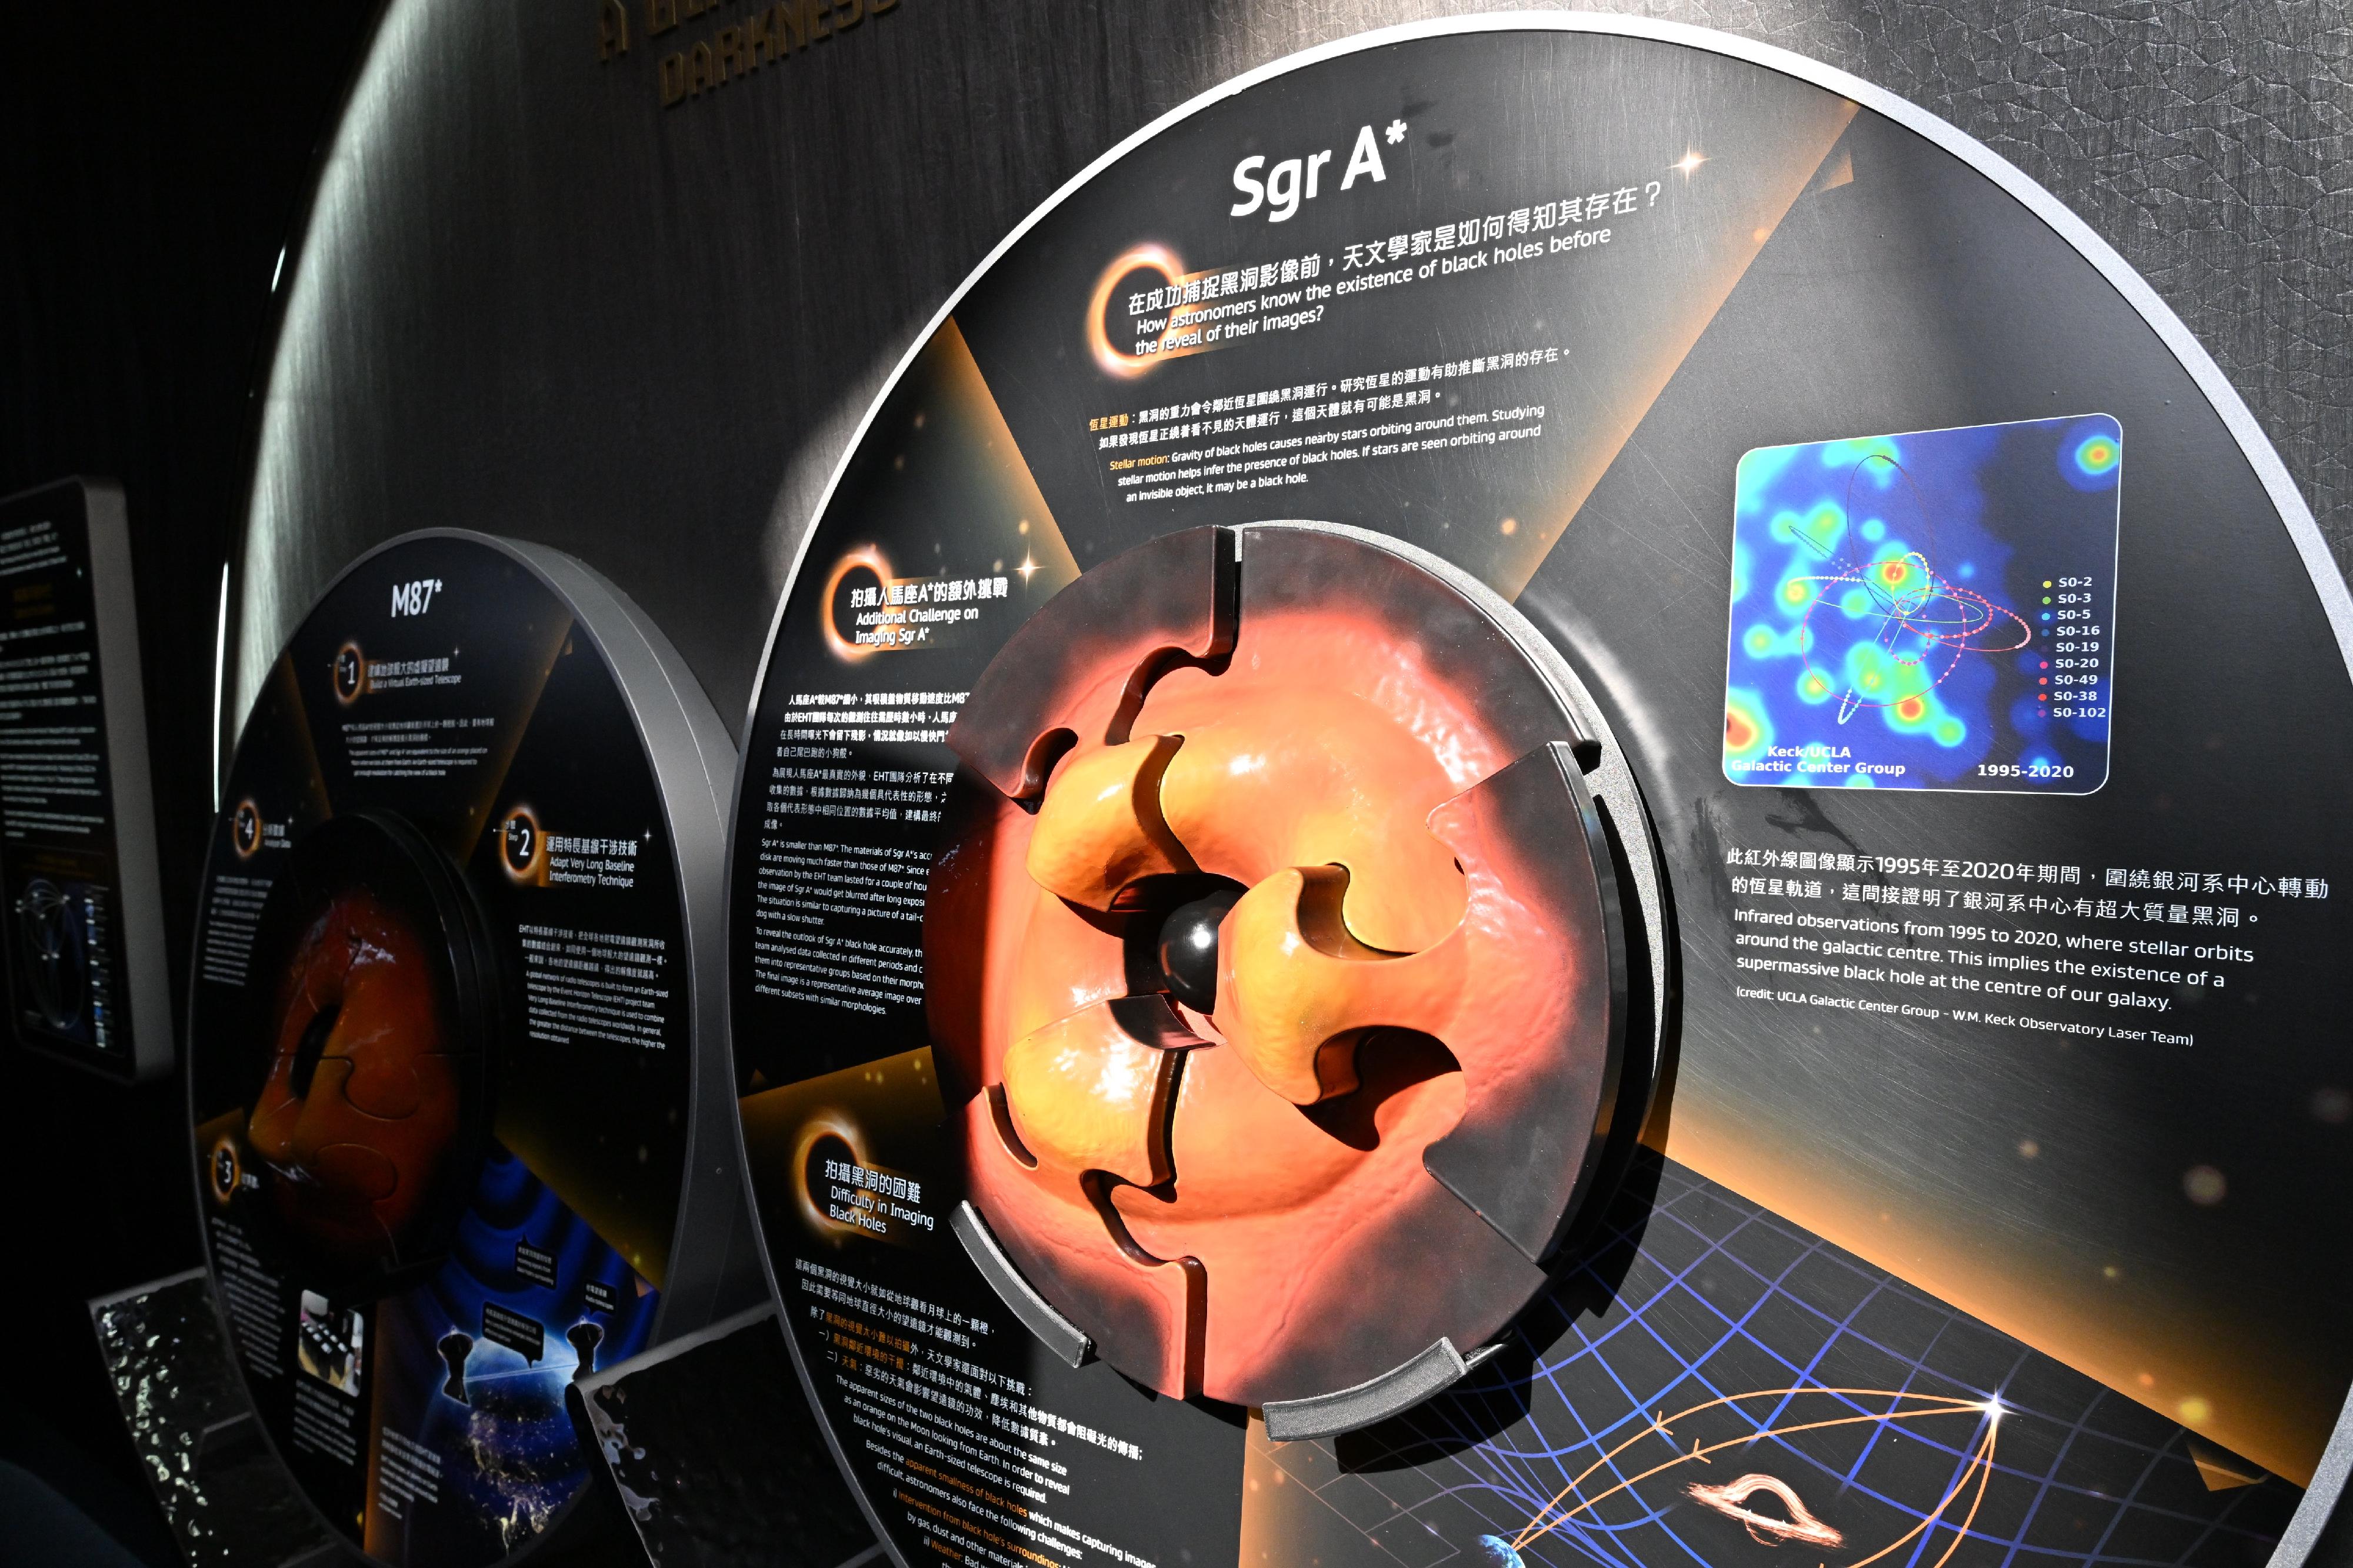 The Hong Kong Space Museum will launch a new free special exhibition, "Black Hole: The Information Barrier", starting tomorrow (October 25). The 3D puzzles at the exhibition introduce the technology of producing black hole images. 